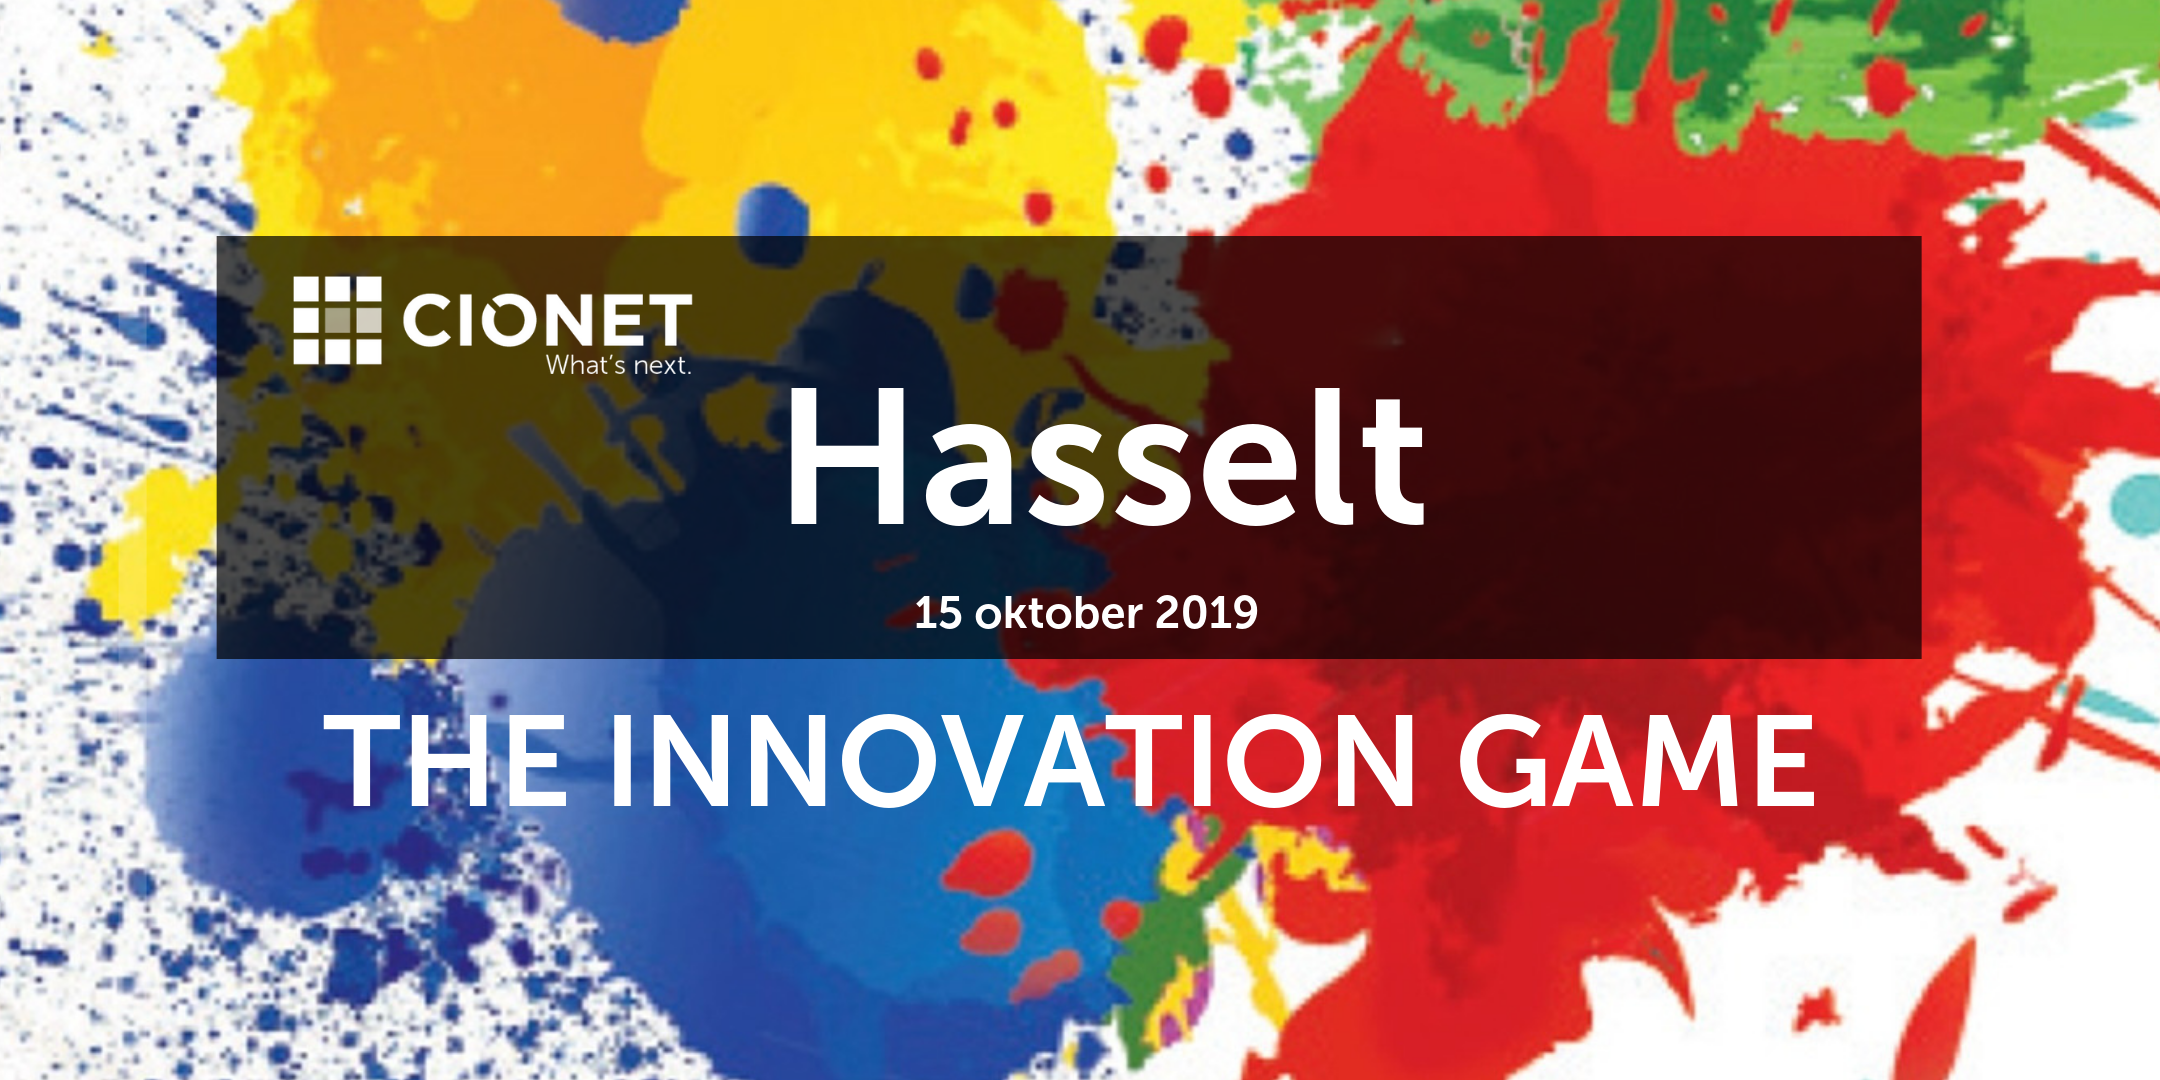 BE20191015 - The Innovation Game - Hasselt